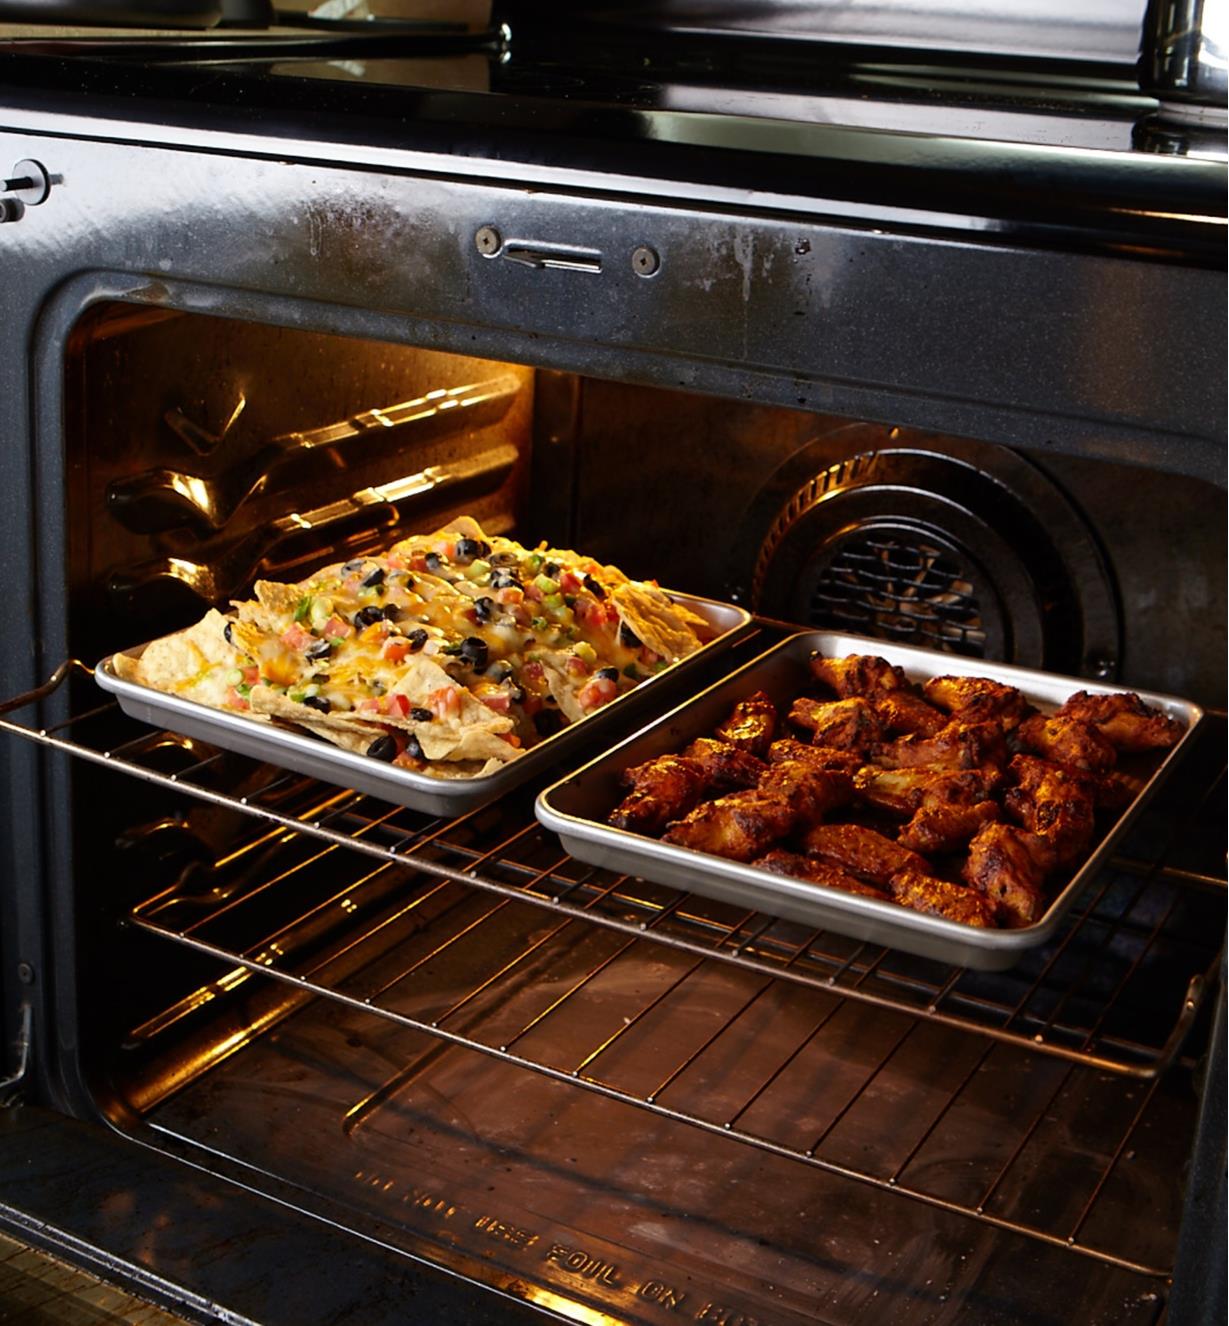 Two quarter sheet baking pans side by side on rack in oven.